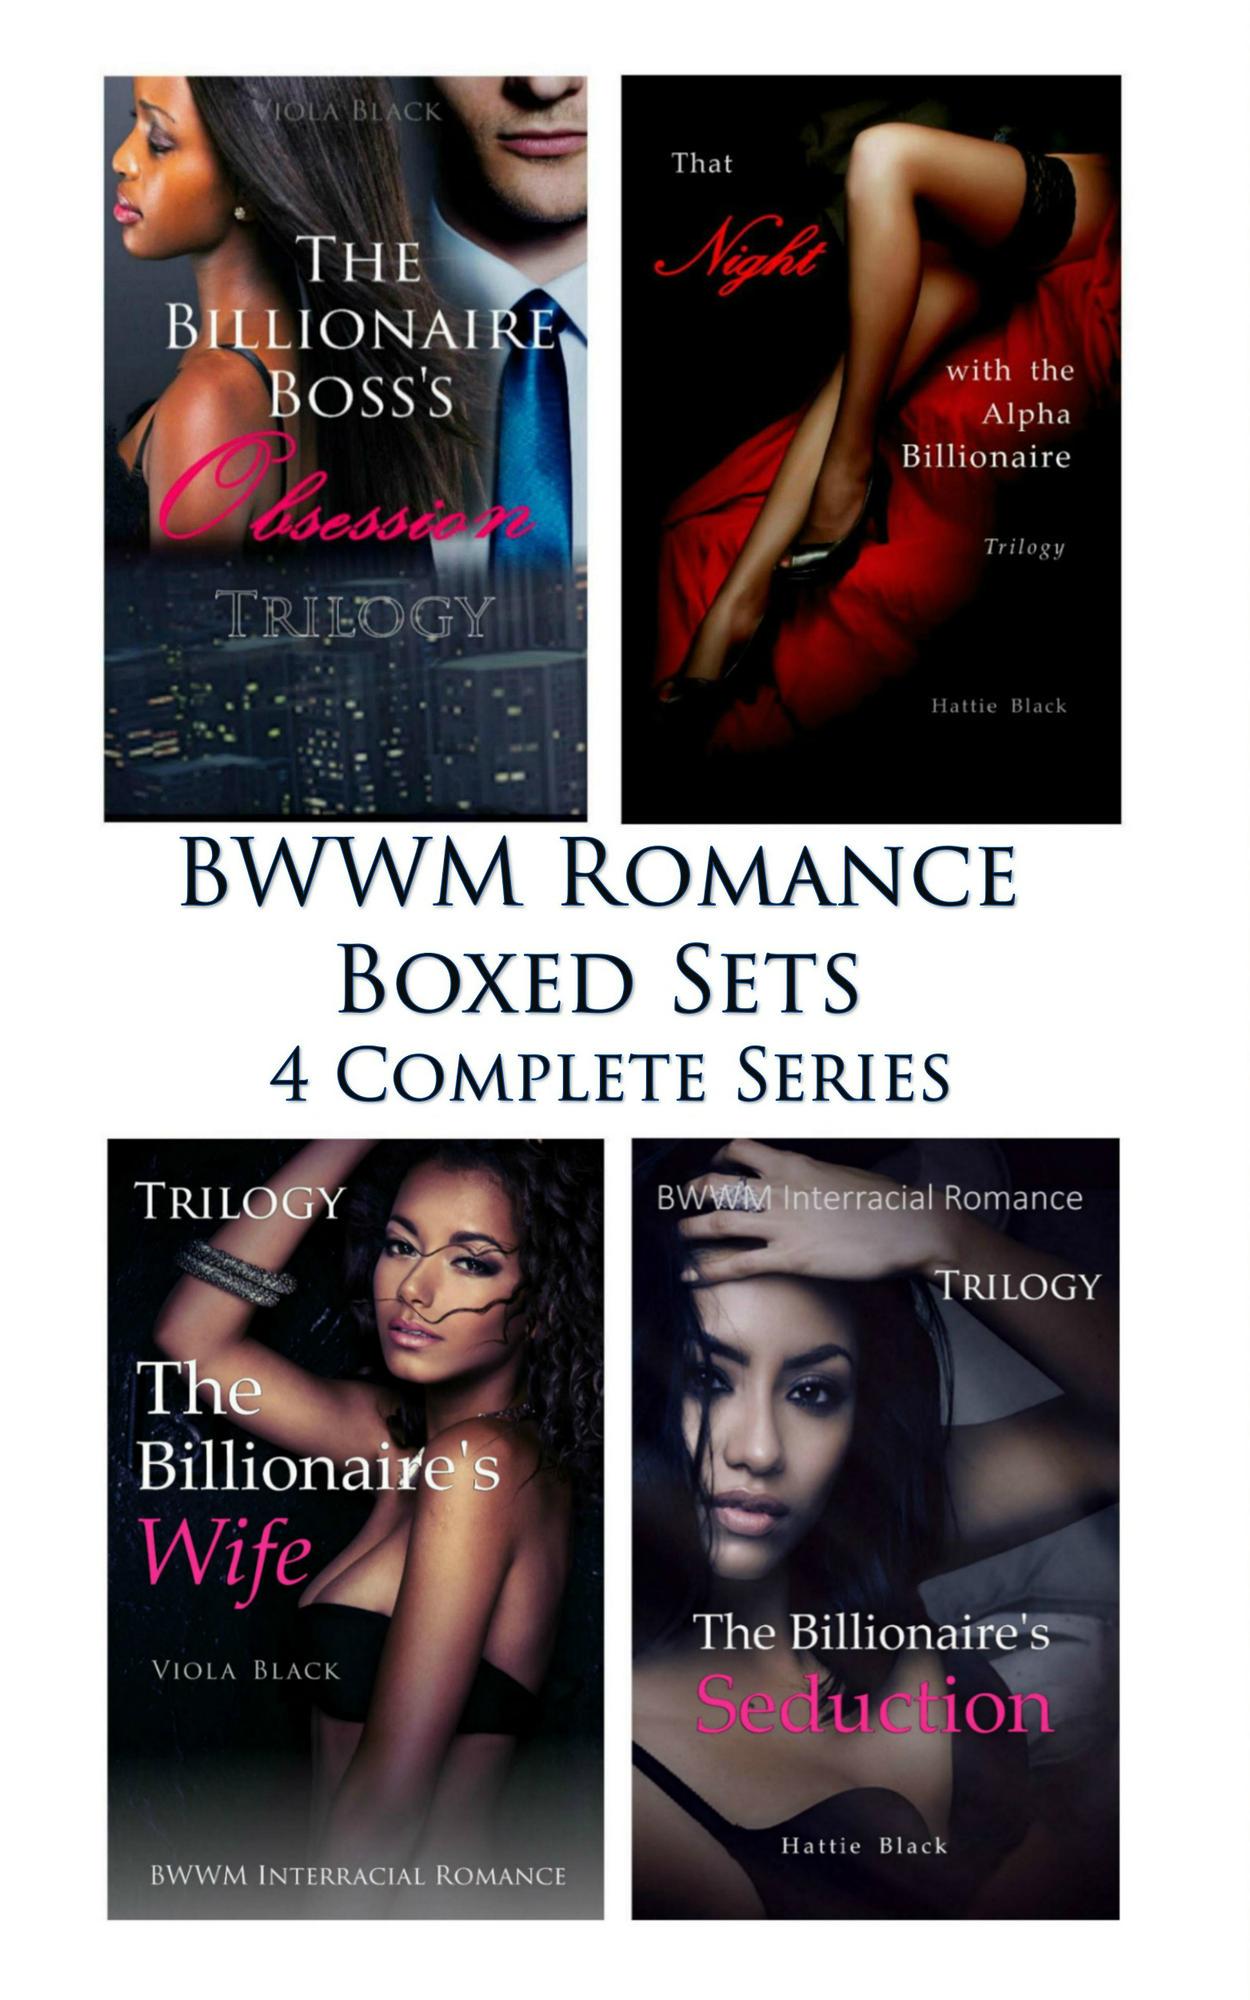 Smashwords Bwwm Romance Boxed Sets The Billionaire Bosss Obsessionthat Night With The Alpha 